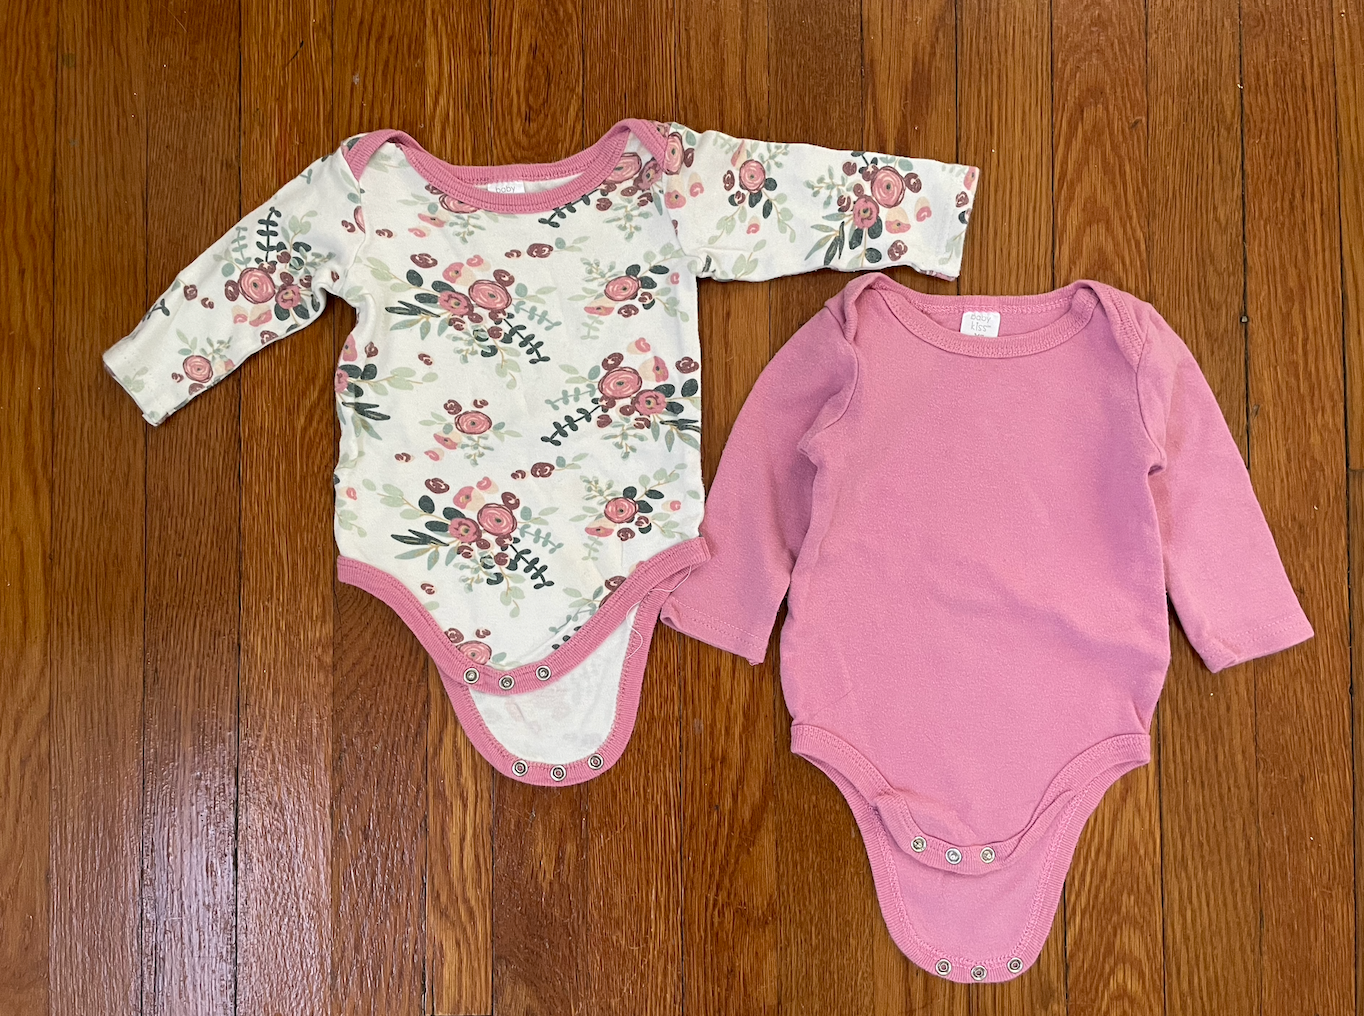 Girls onesie bundle - pink and pink floral - Baby Kiss brand - size 3-6 months - EUC